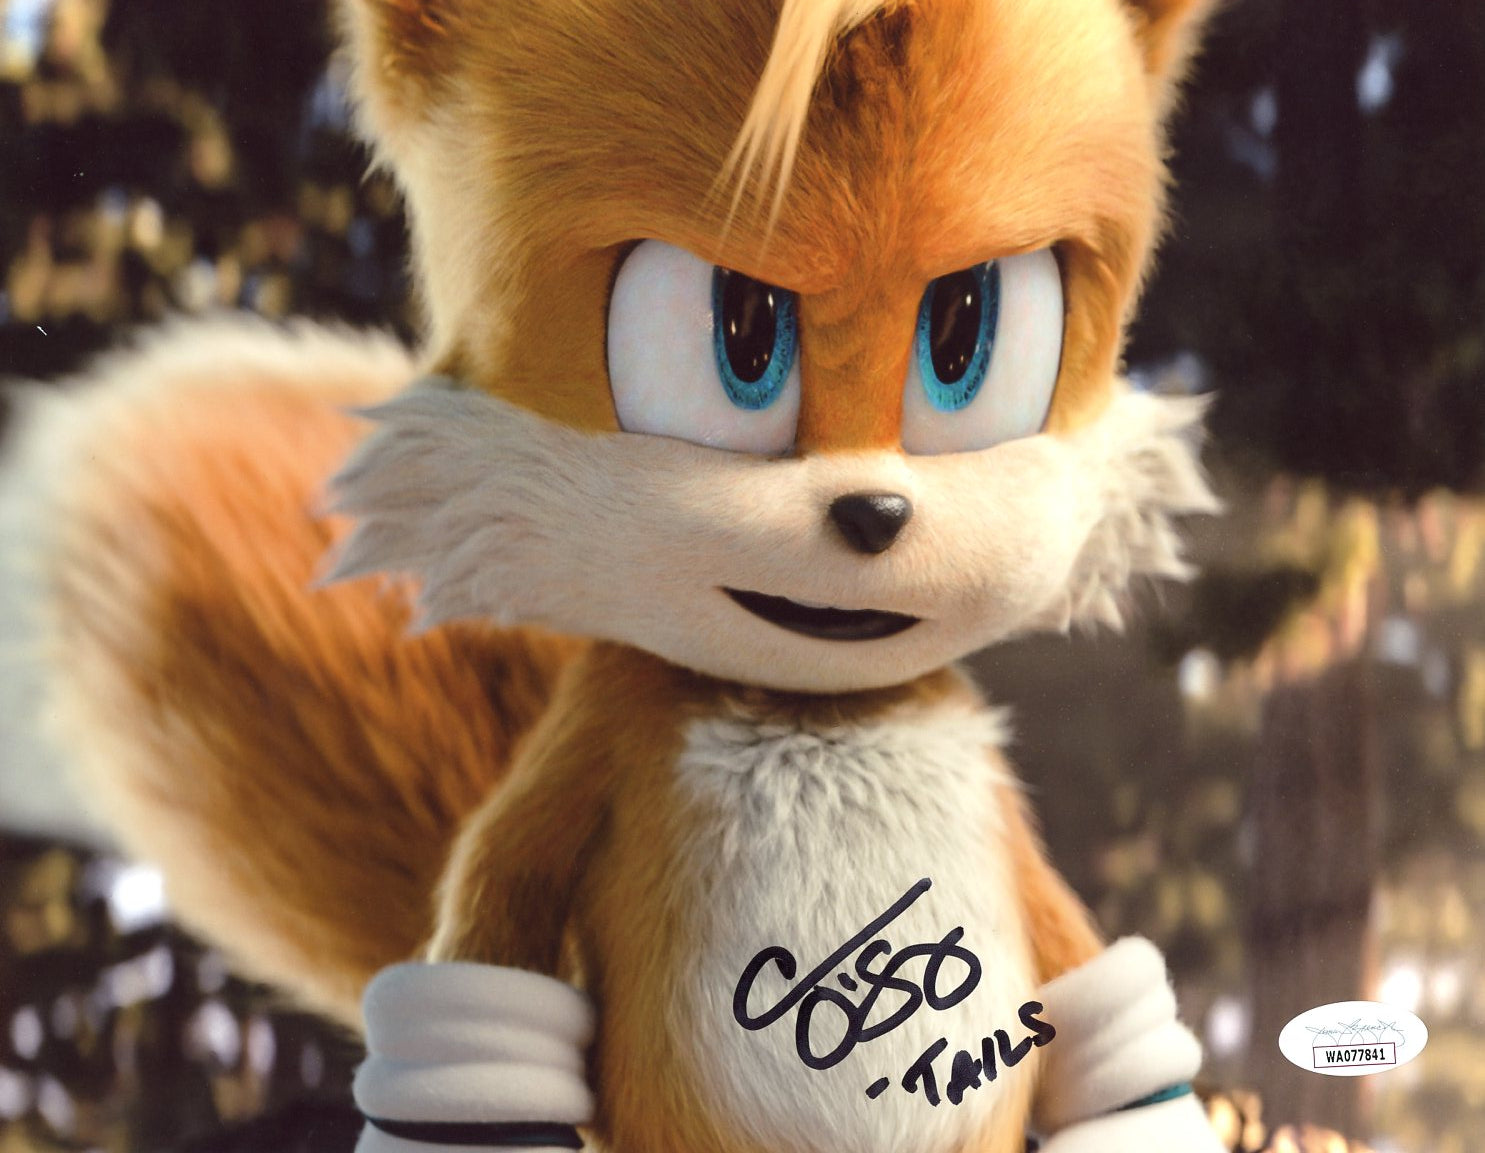 Colleen O'Shaughnessey Sonic the Hedgehog 8x10 Signed Photo JSA Certified Autograph GalaxyCon